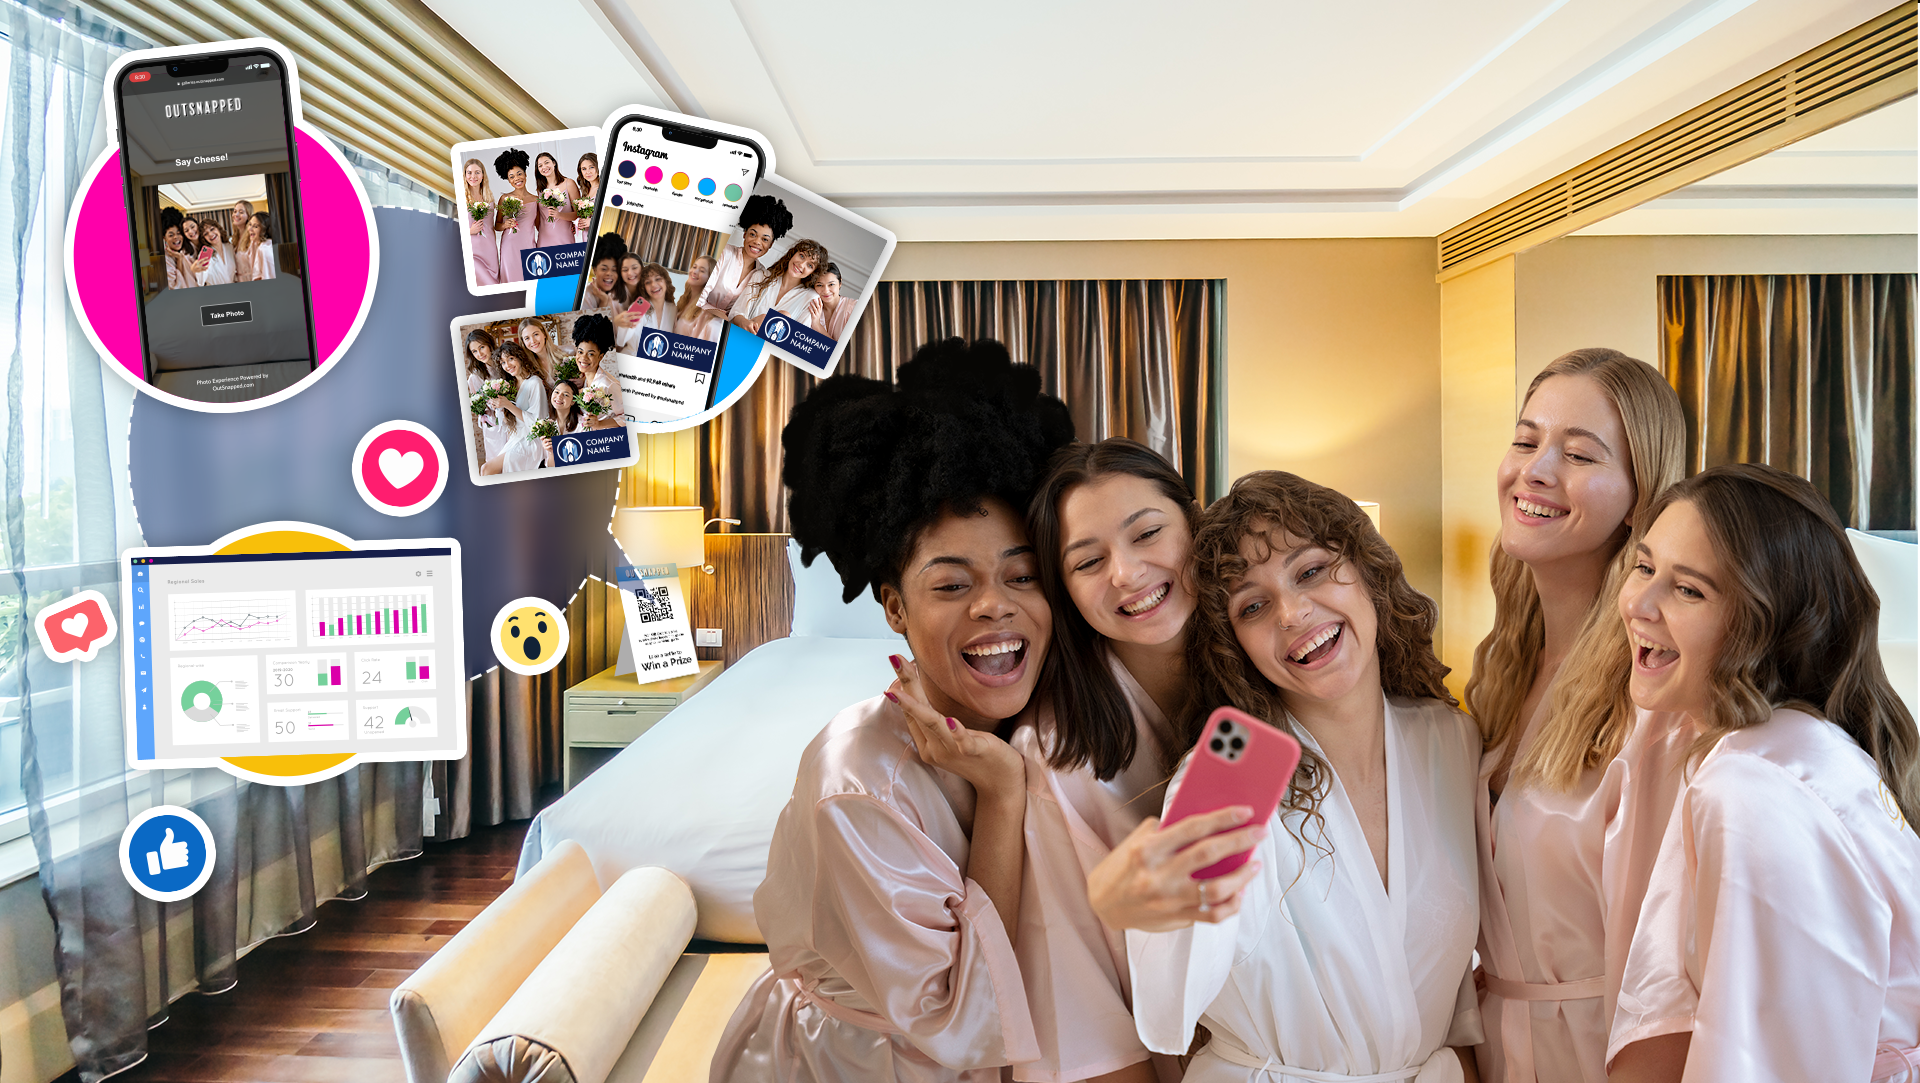 Bachelorette Party uses QR Code to Activate a hybrid Hotel Room Photo Booth Experience on their Own Devices